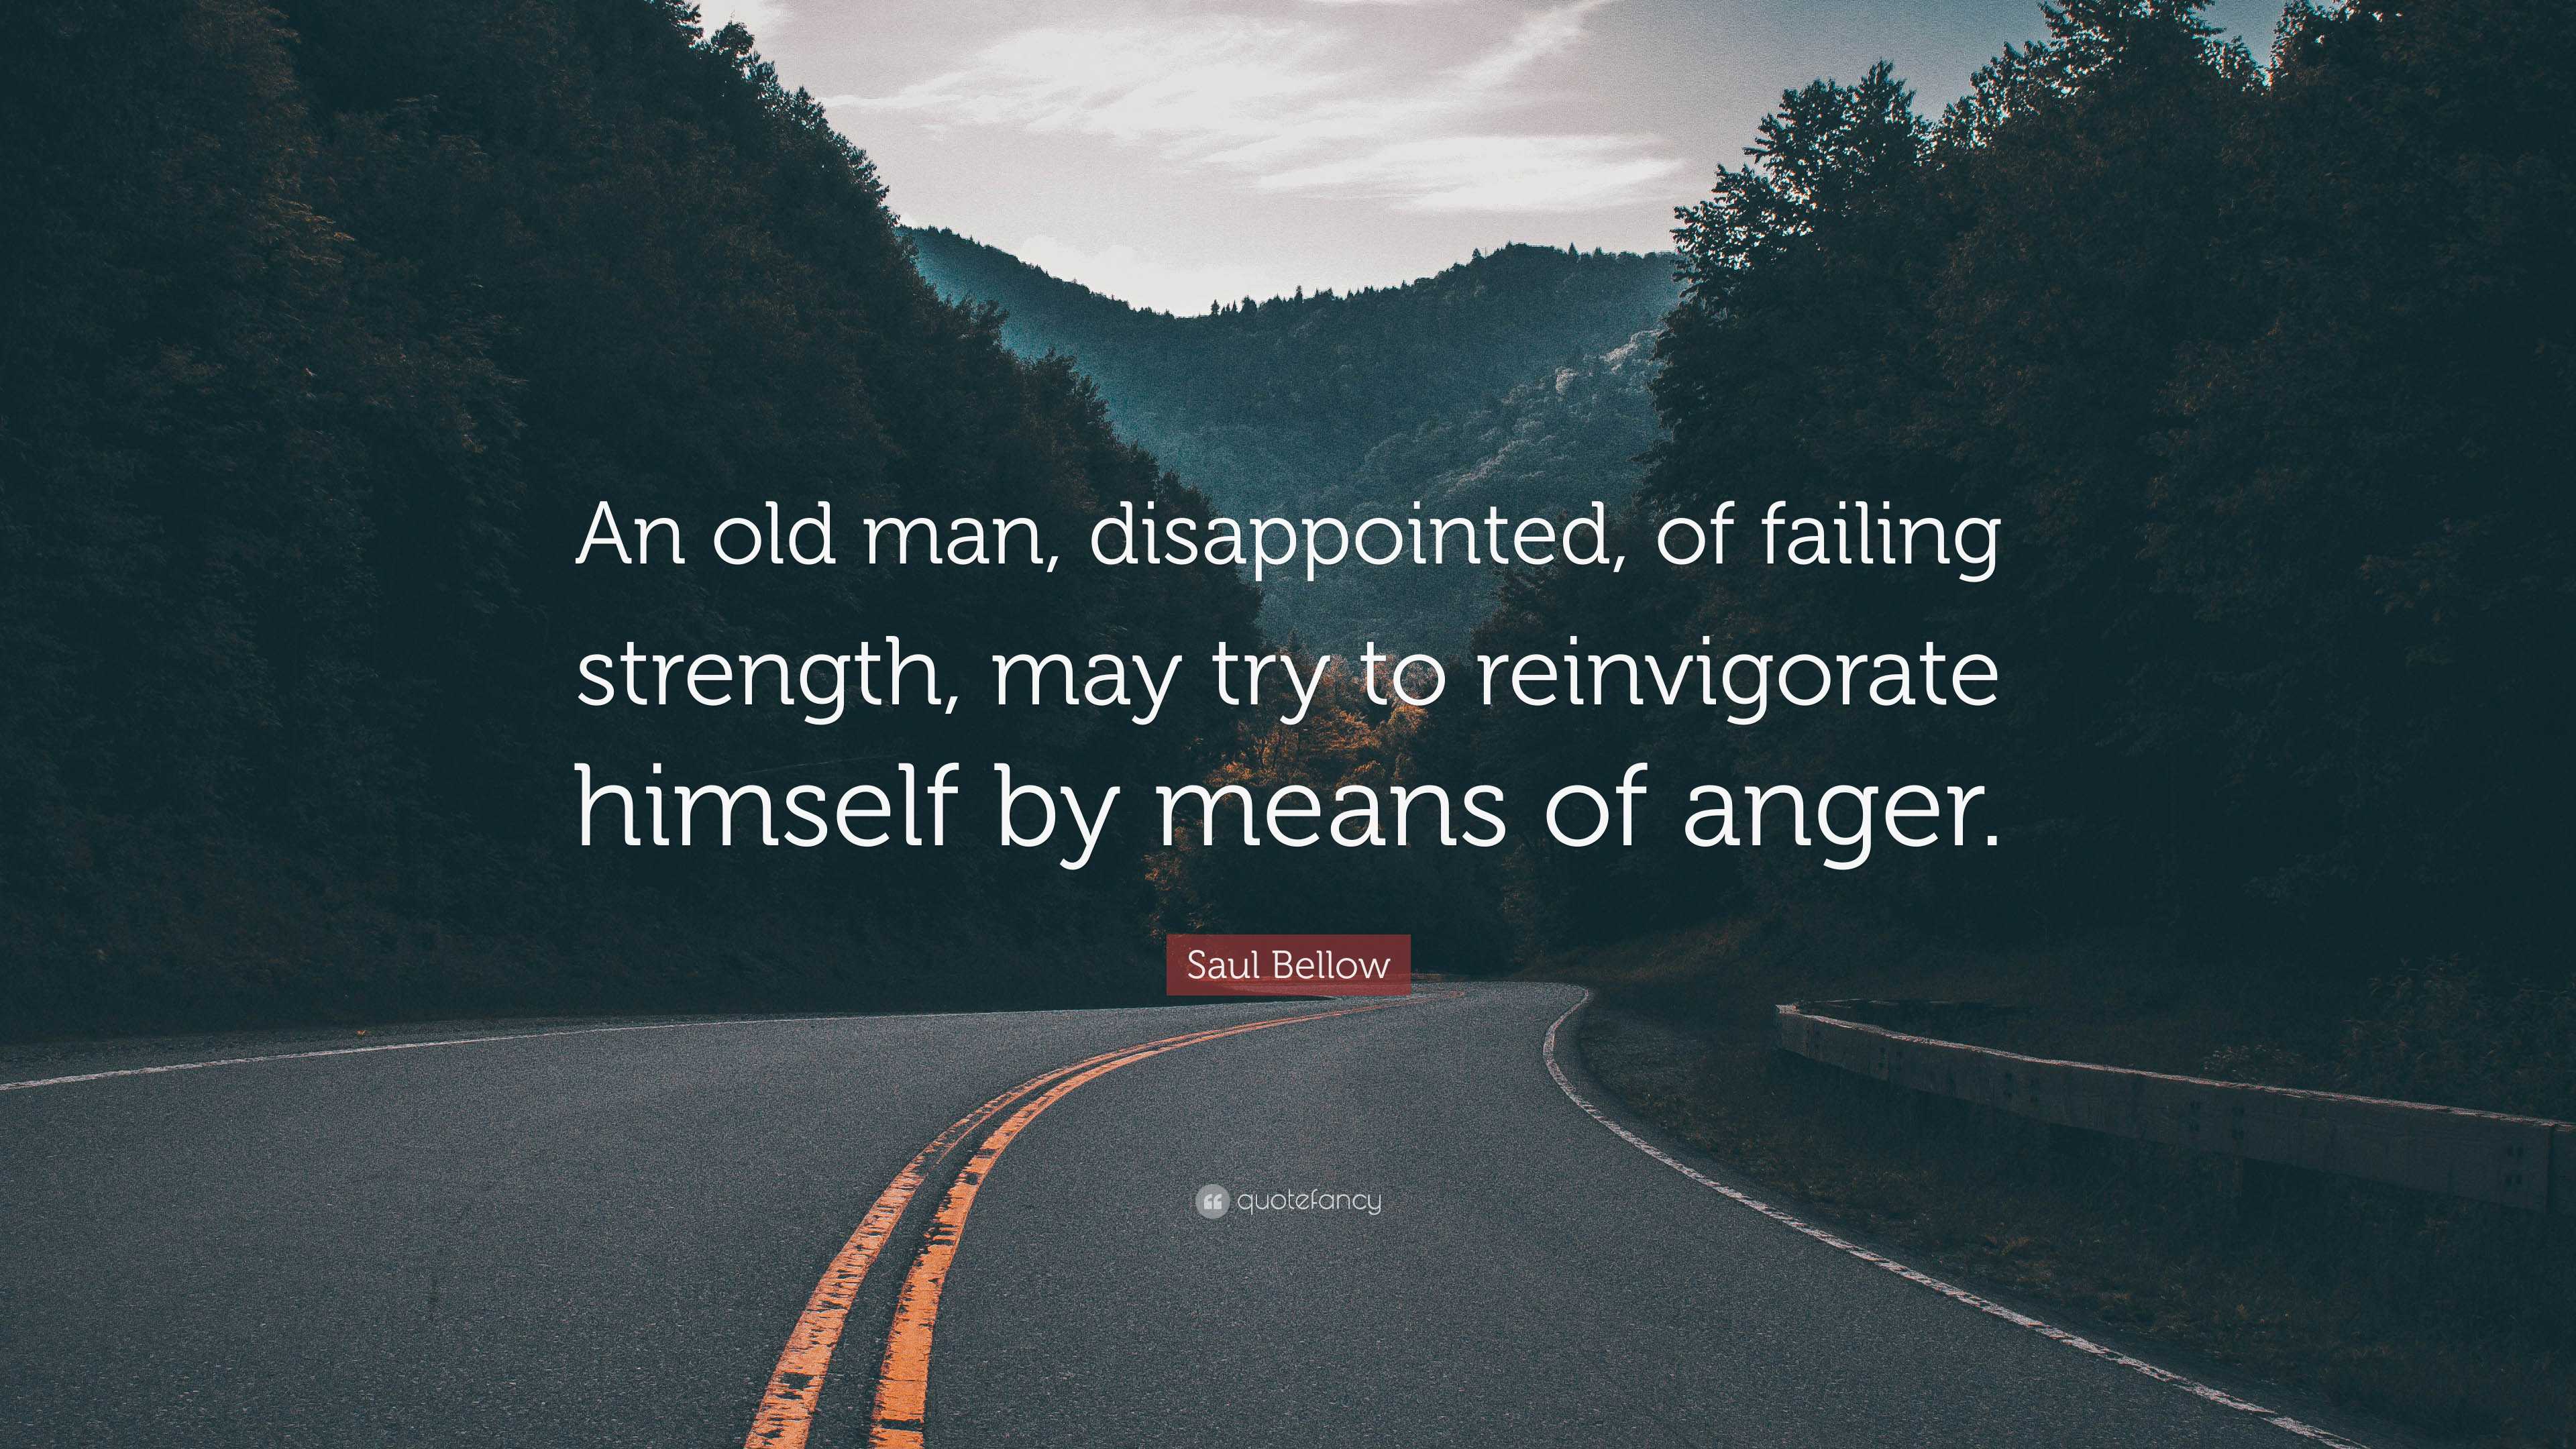 Saul Bellow Quote: “An old man, disappointed, of failing strength, may ...